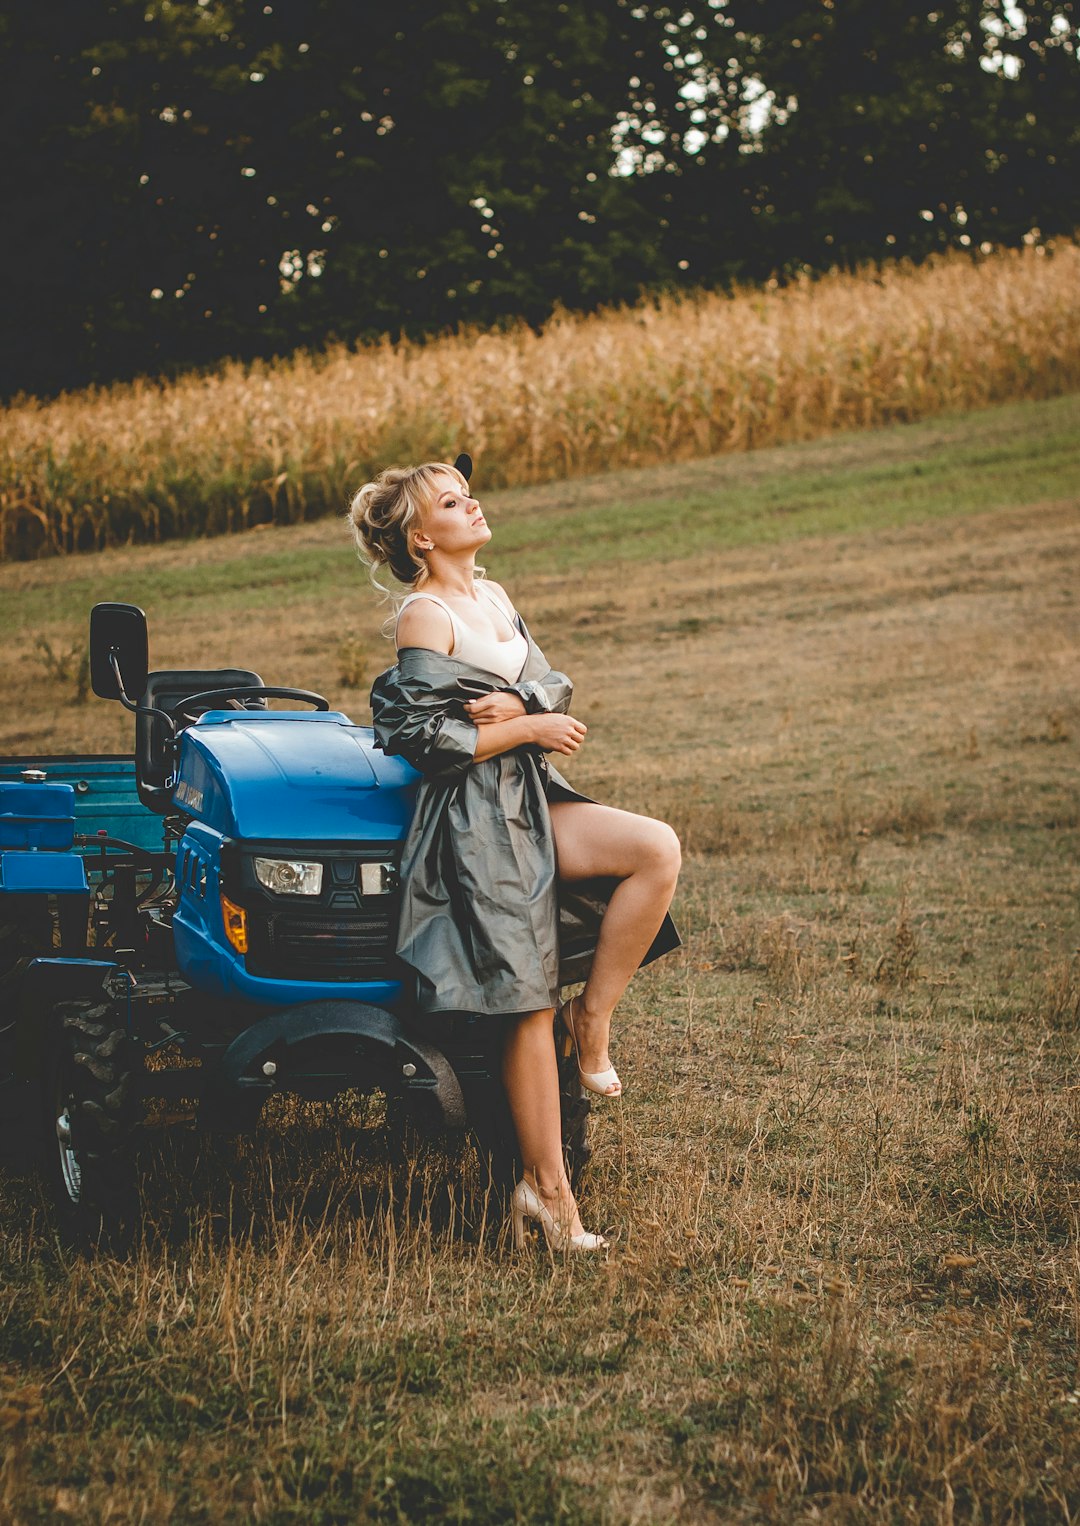 woman in white shirt and gray skirt riding on green tractor on brown grass field during